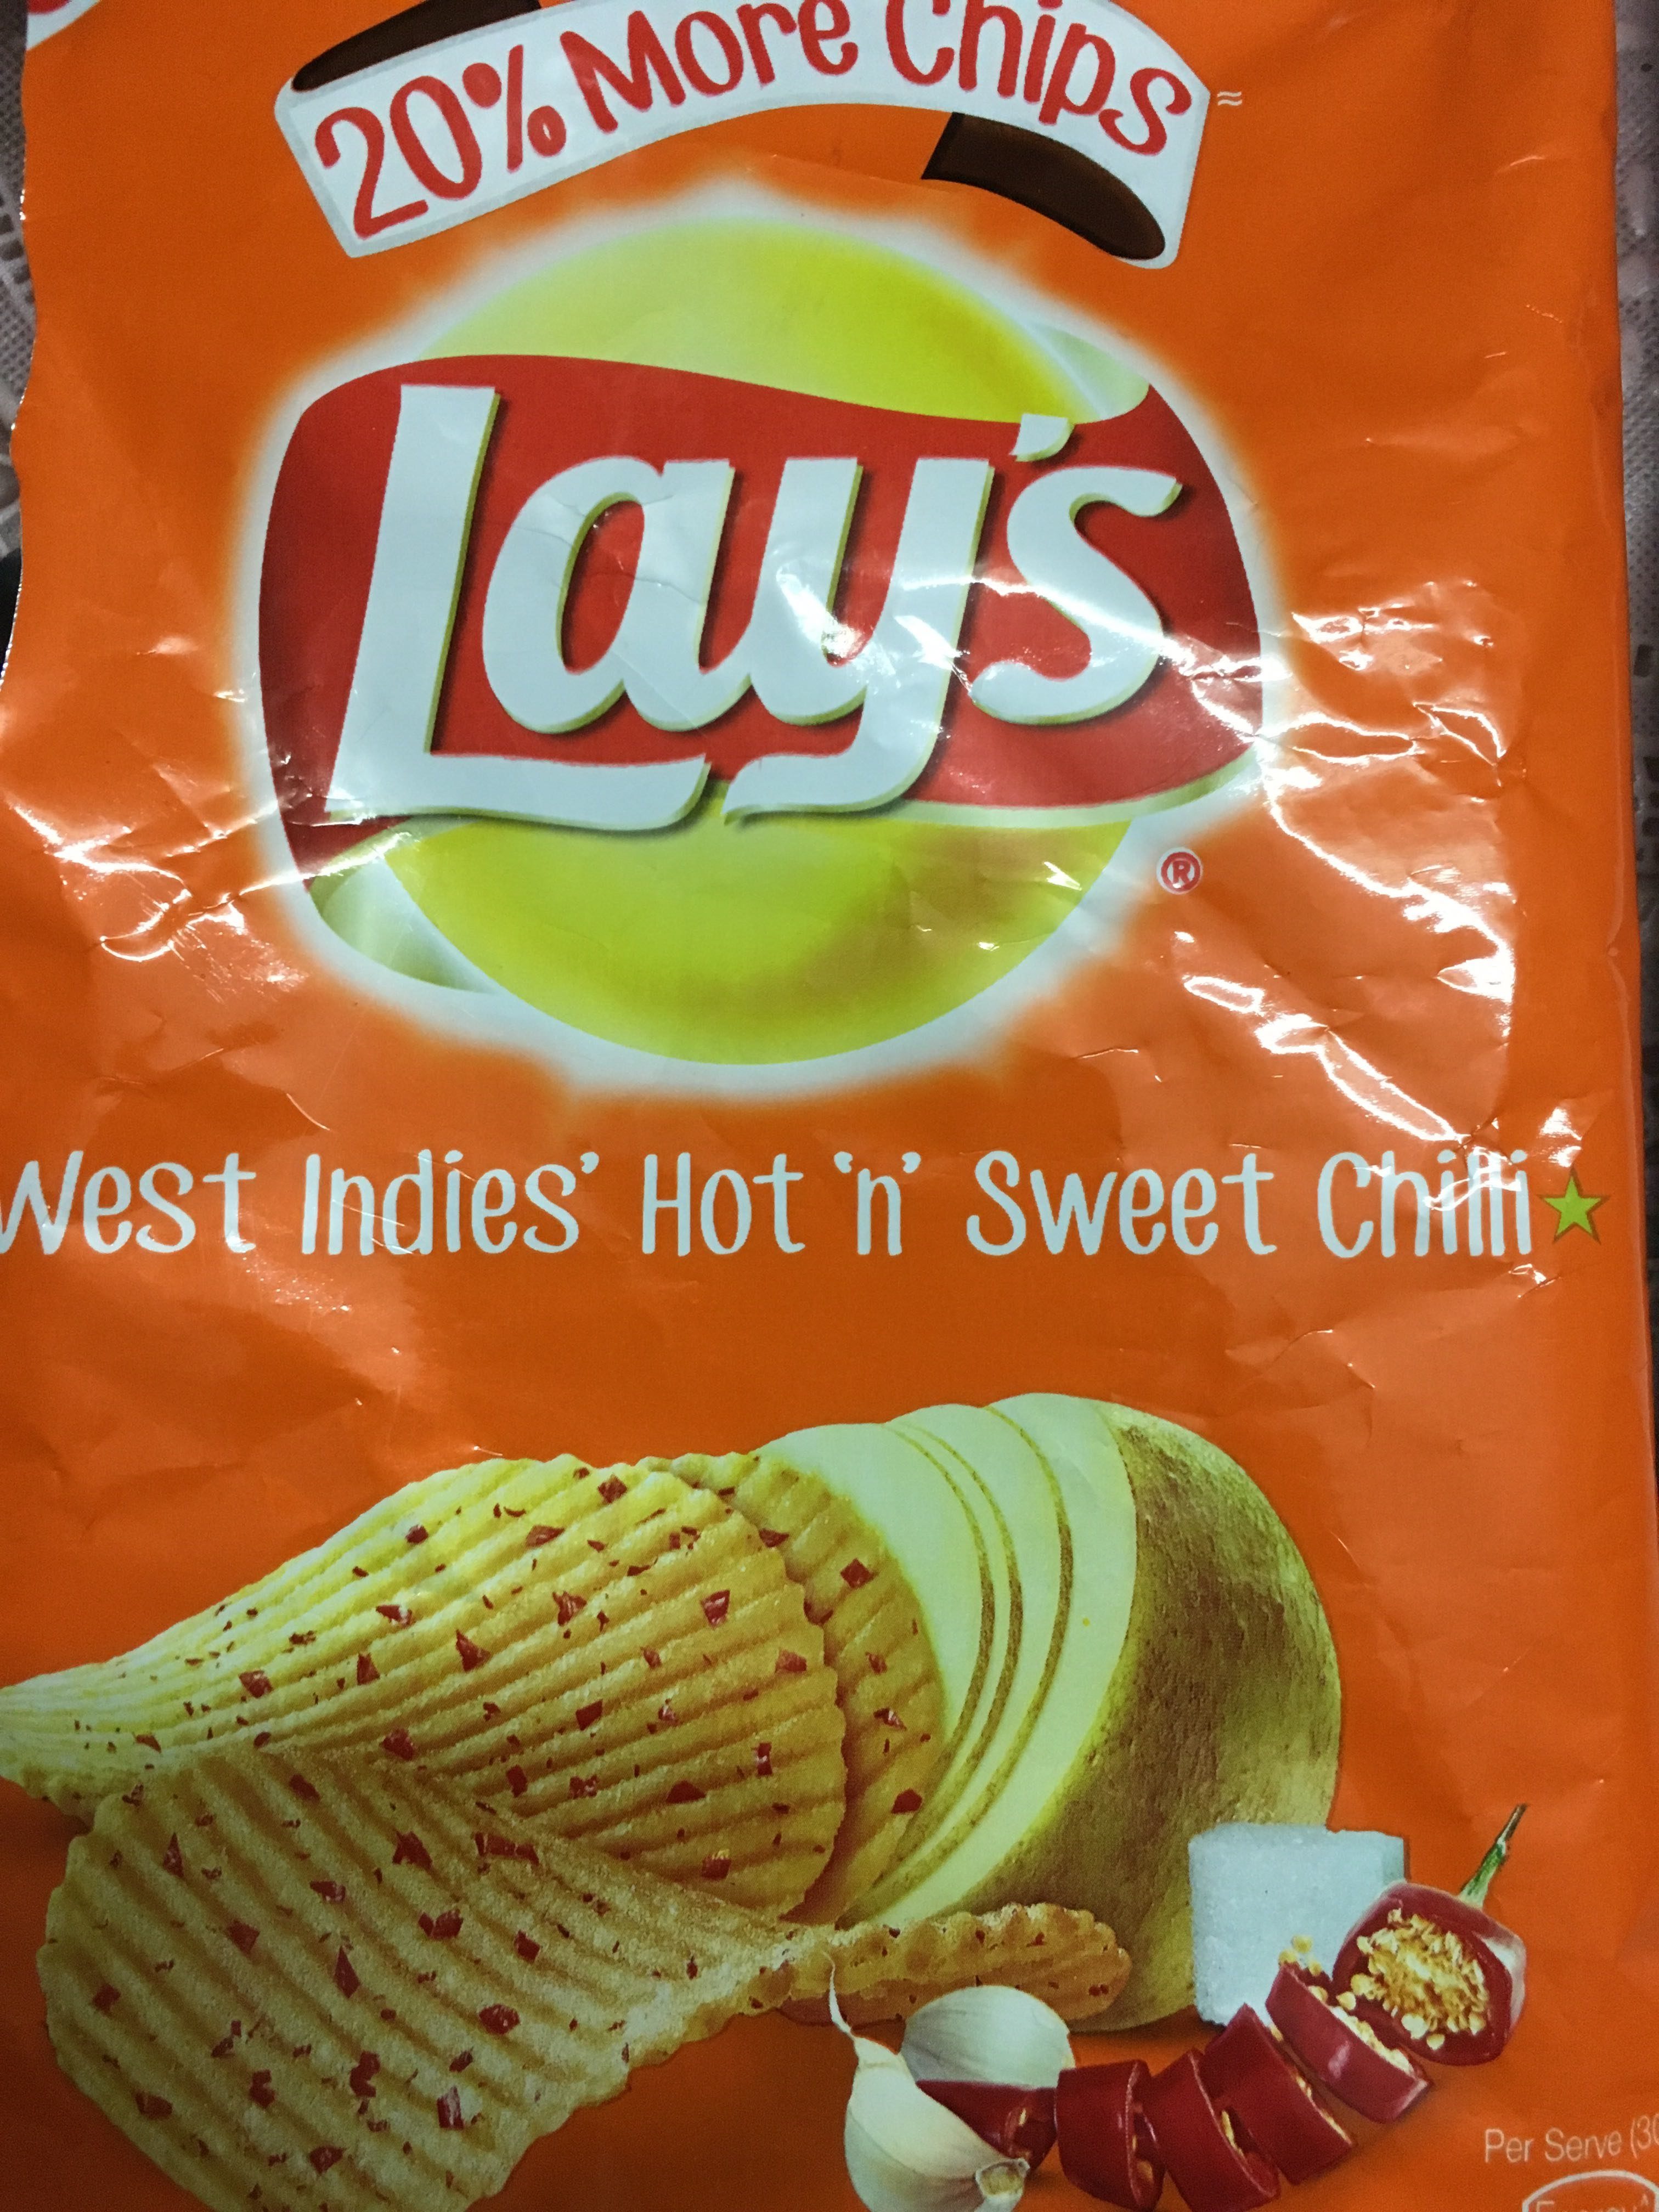 West Indies' Hot 'n' Sweet Chilli - Product